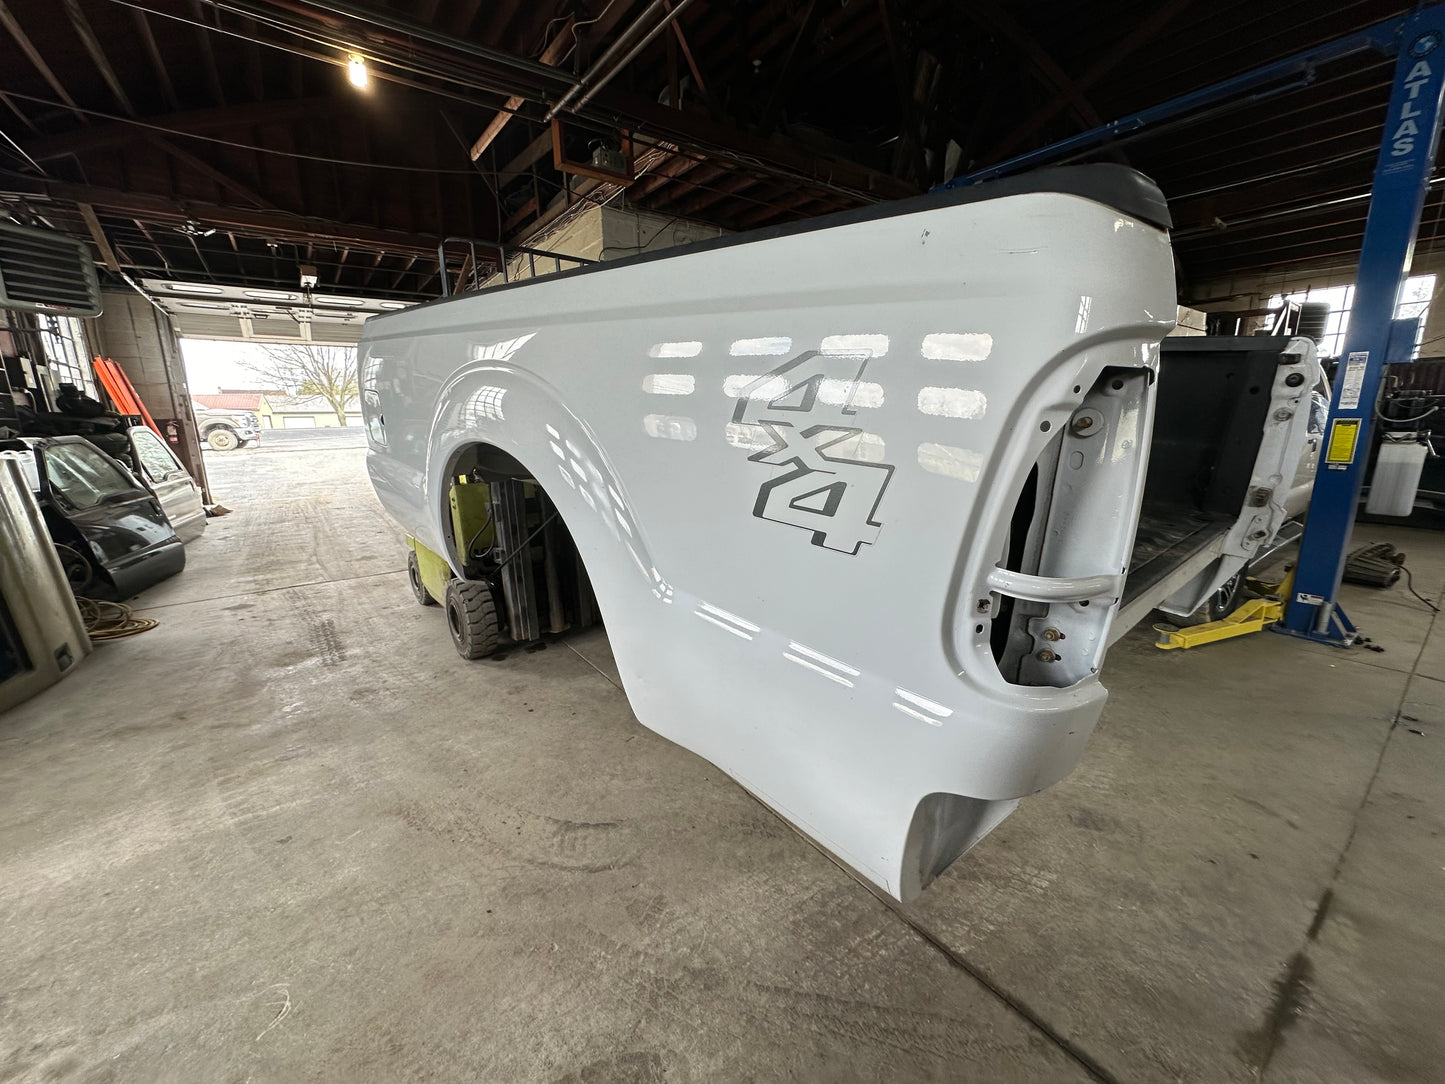 2011-2016 Superduty 8’ bed Oxford white #12592